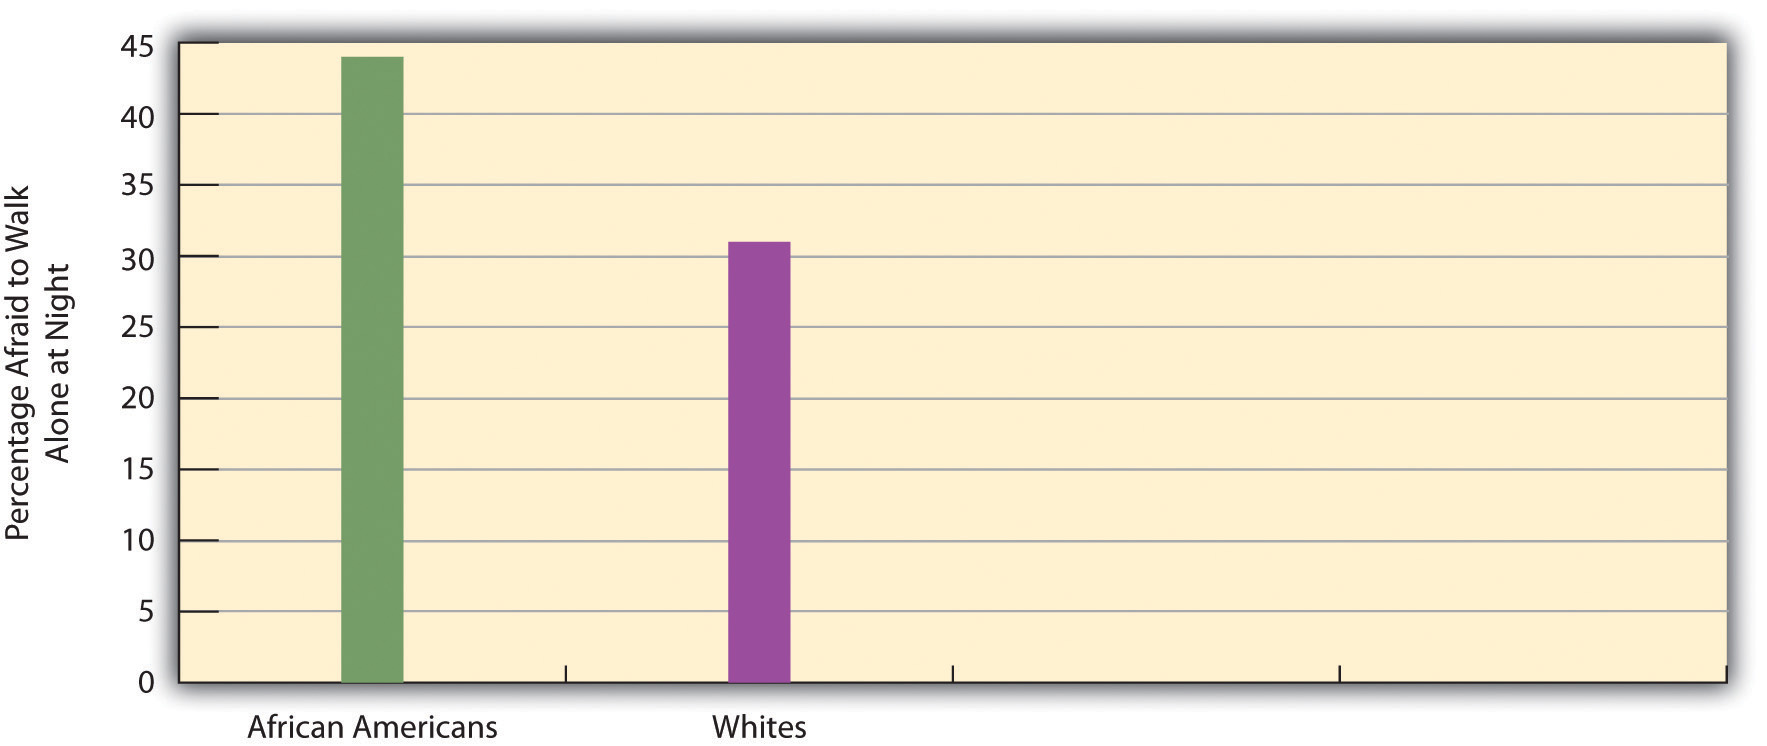 This graph of race and fear of crime shows that African Americans are much more afraid than whites